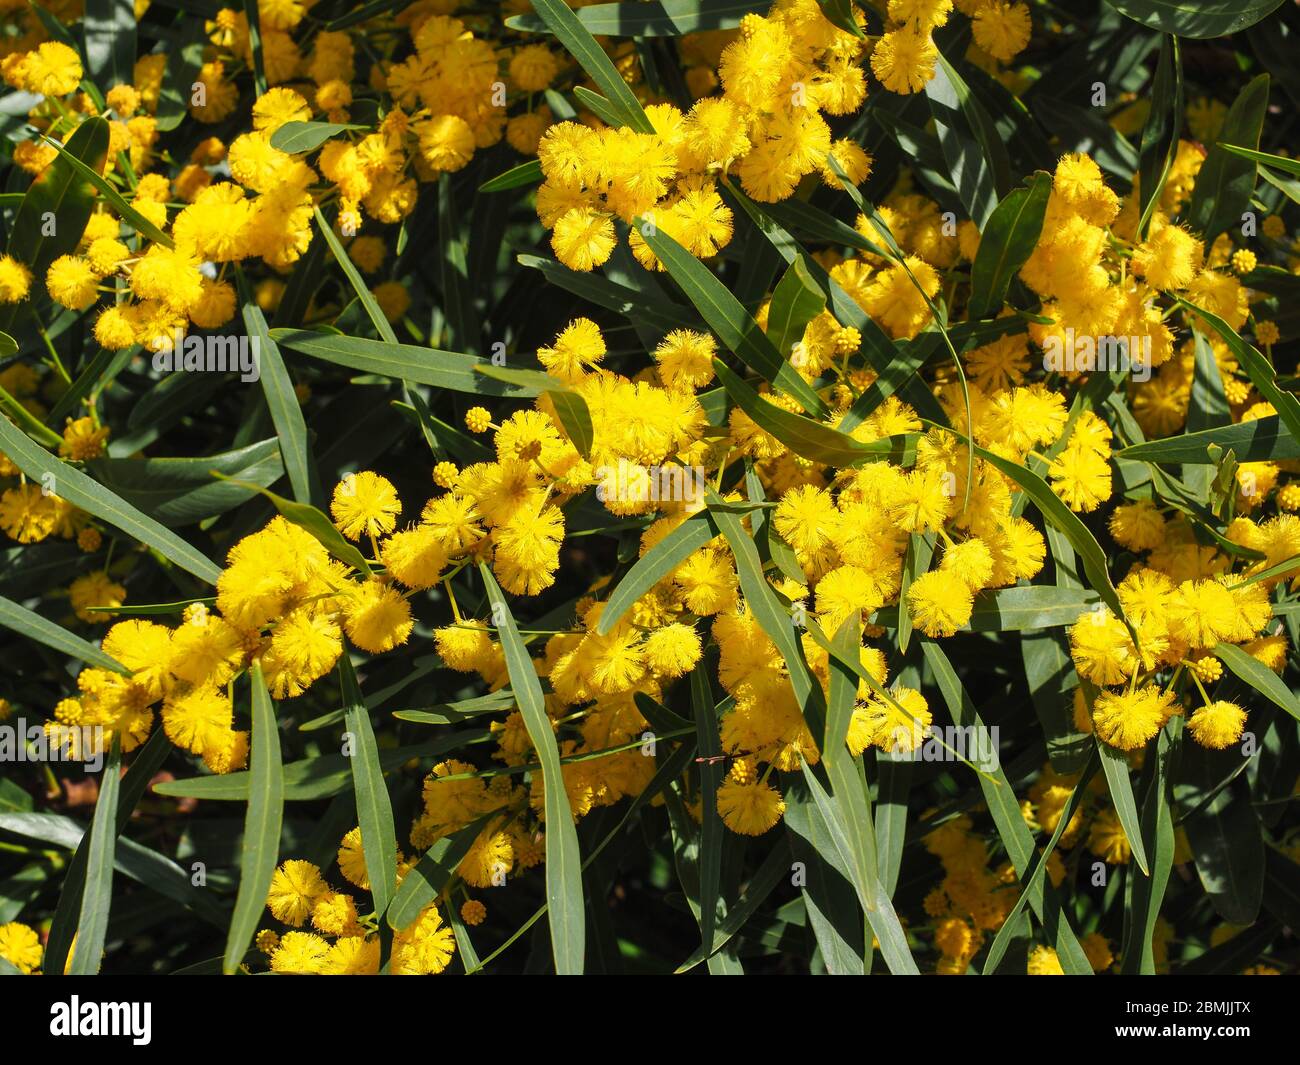 Branch with narrow leaves and yellow ball-like flowers. Acacia Pycnantha or golden Wattle shrub of the subfamily Mimosoideae of pea family Fabaceae. Stock Photo